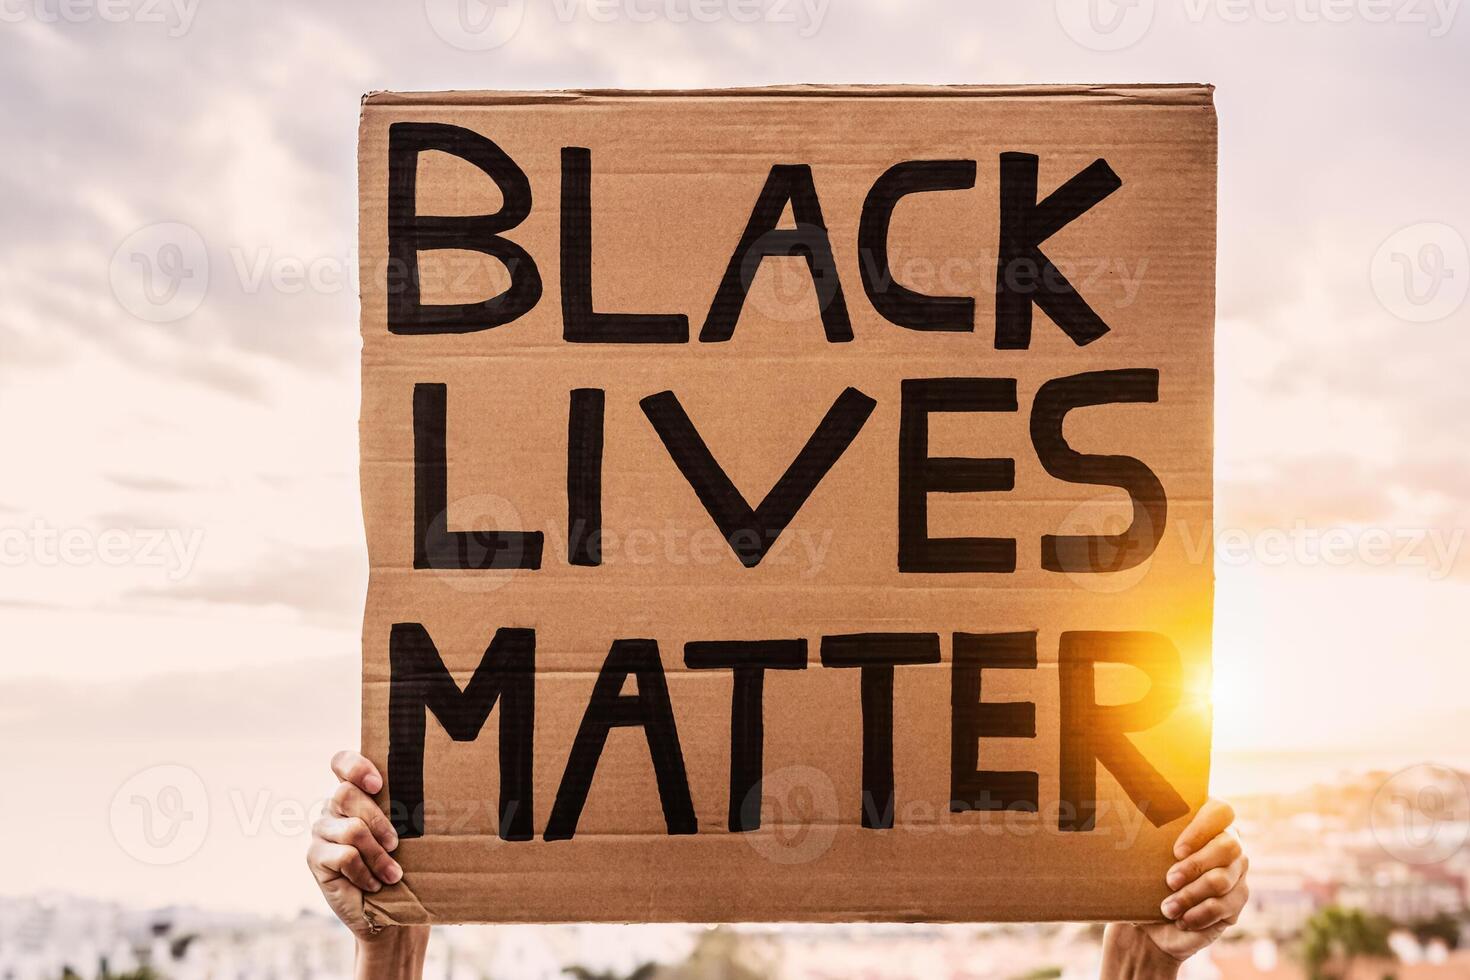 Black lives matter banner - Activist movement protesting against racism and fighting for equality - Social protests and human rights concept photo